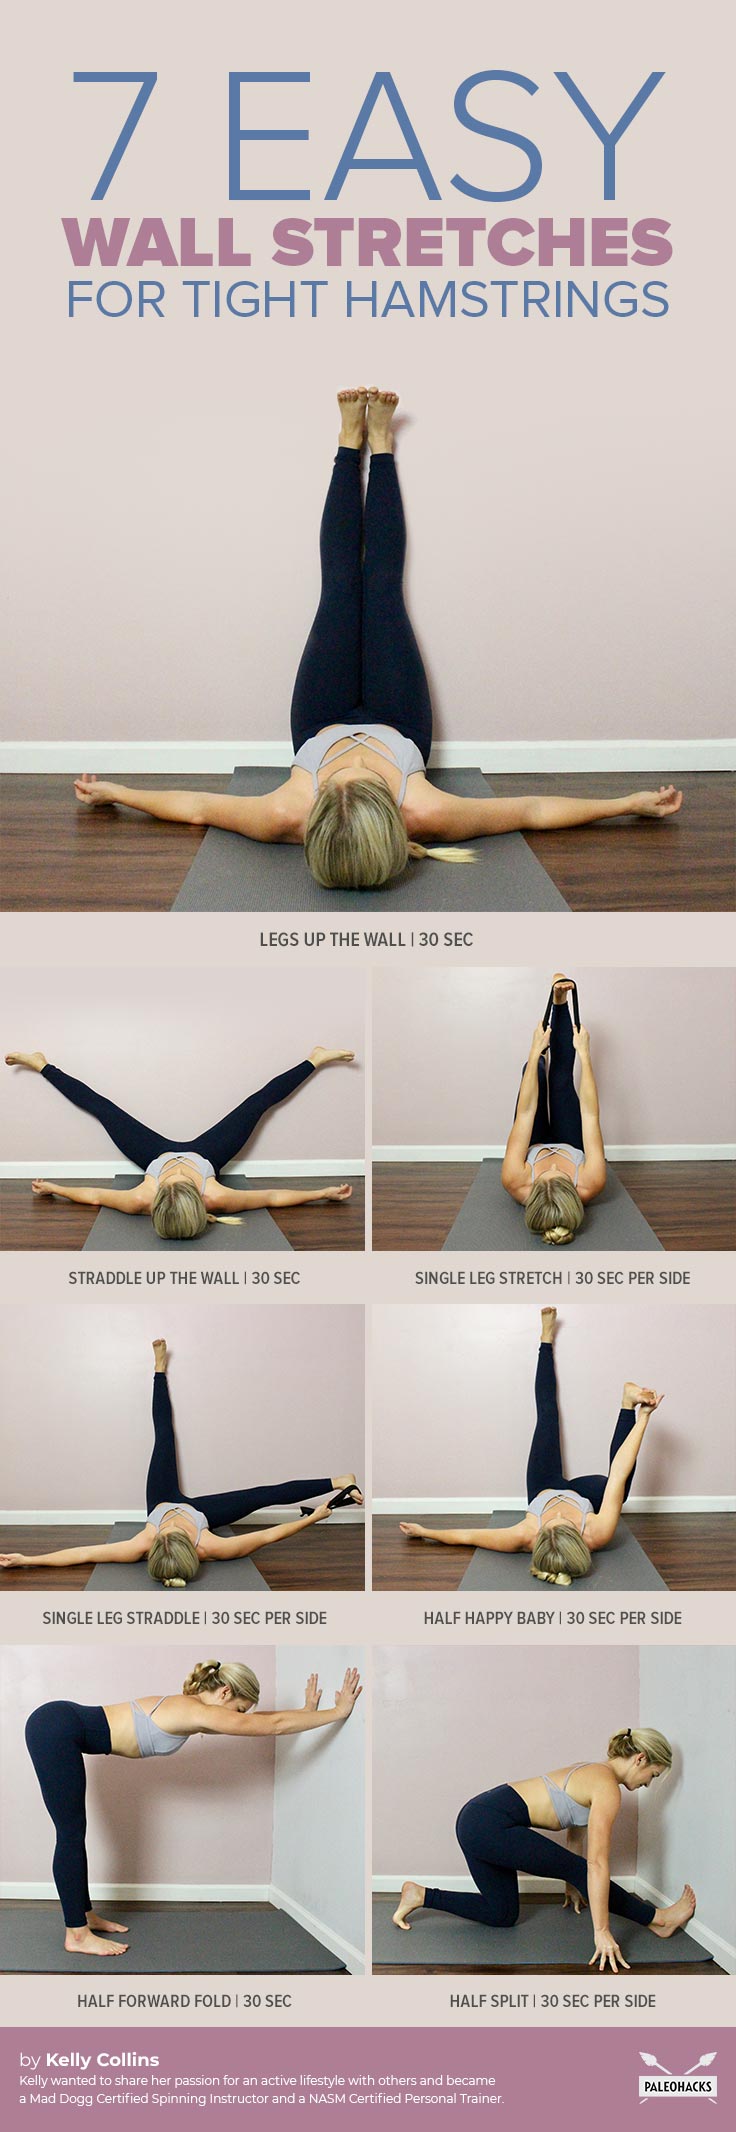 Find the nearest wall - we’re about to show you how to loosen up tight hamstrings with these easy, feel-good stretches.